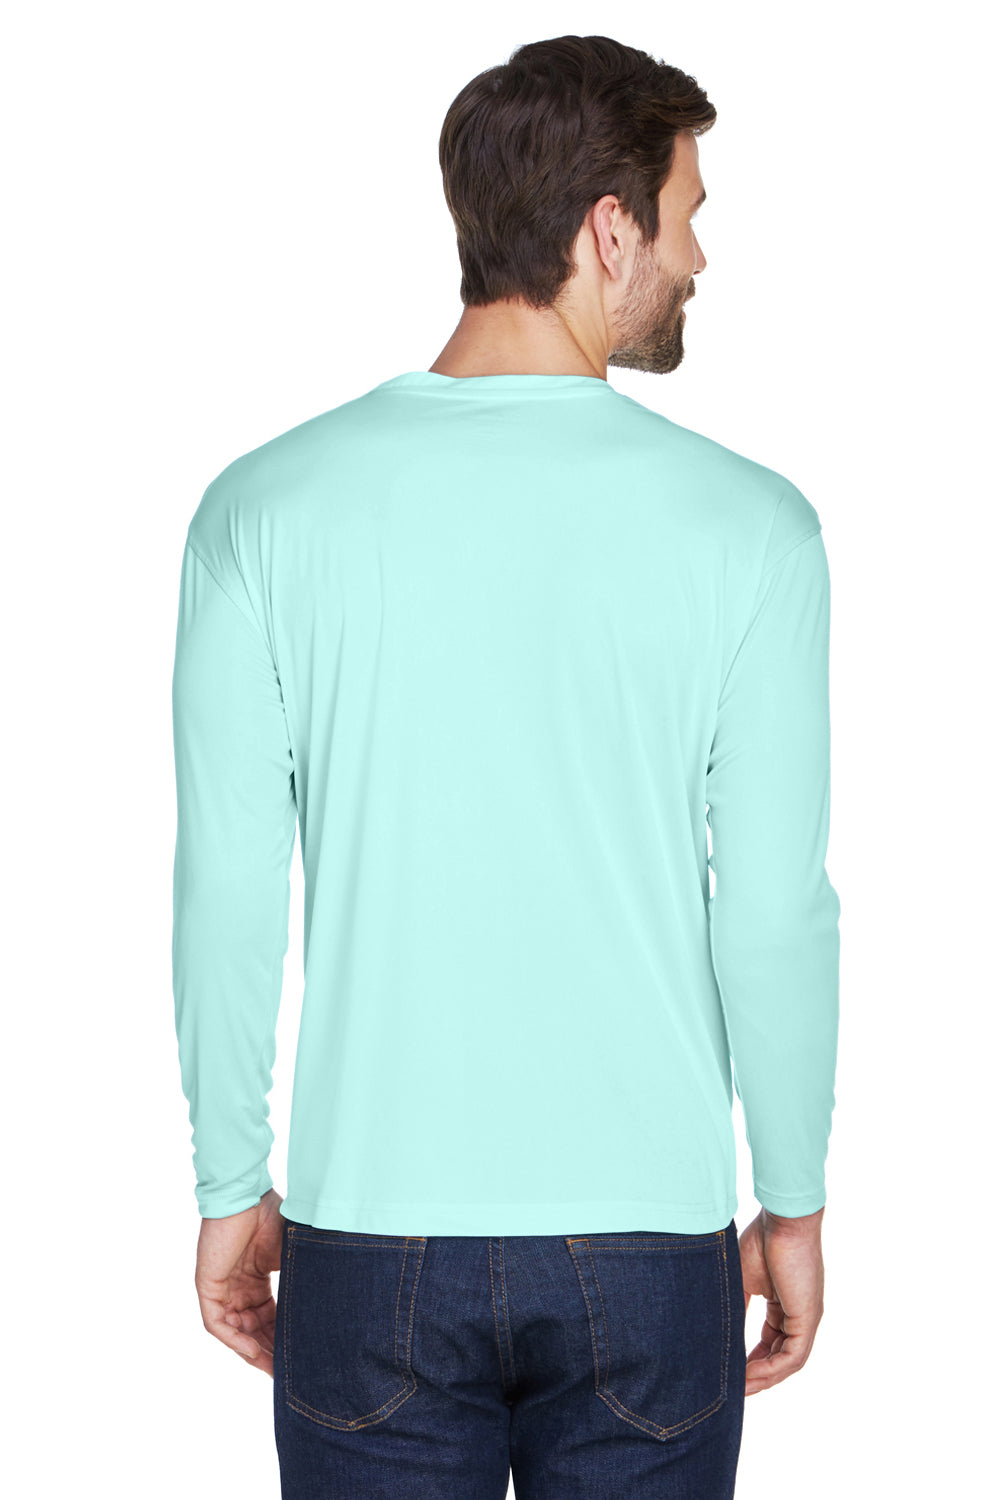 UltraClub 8422 Mens Cool & Dry Performance Moisture Wicking Long Sleeve Crewneck T-Shirt Sea Frost Green Back